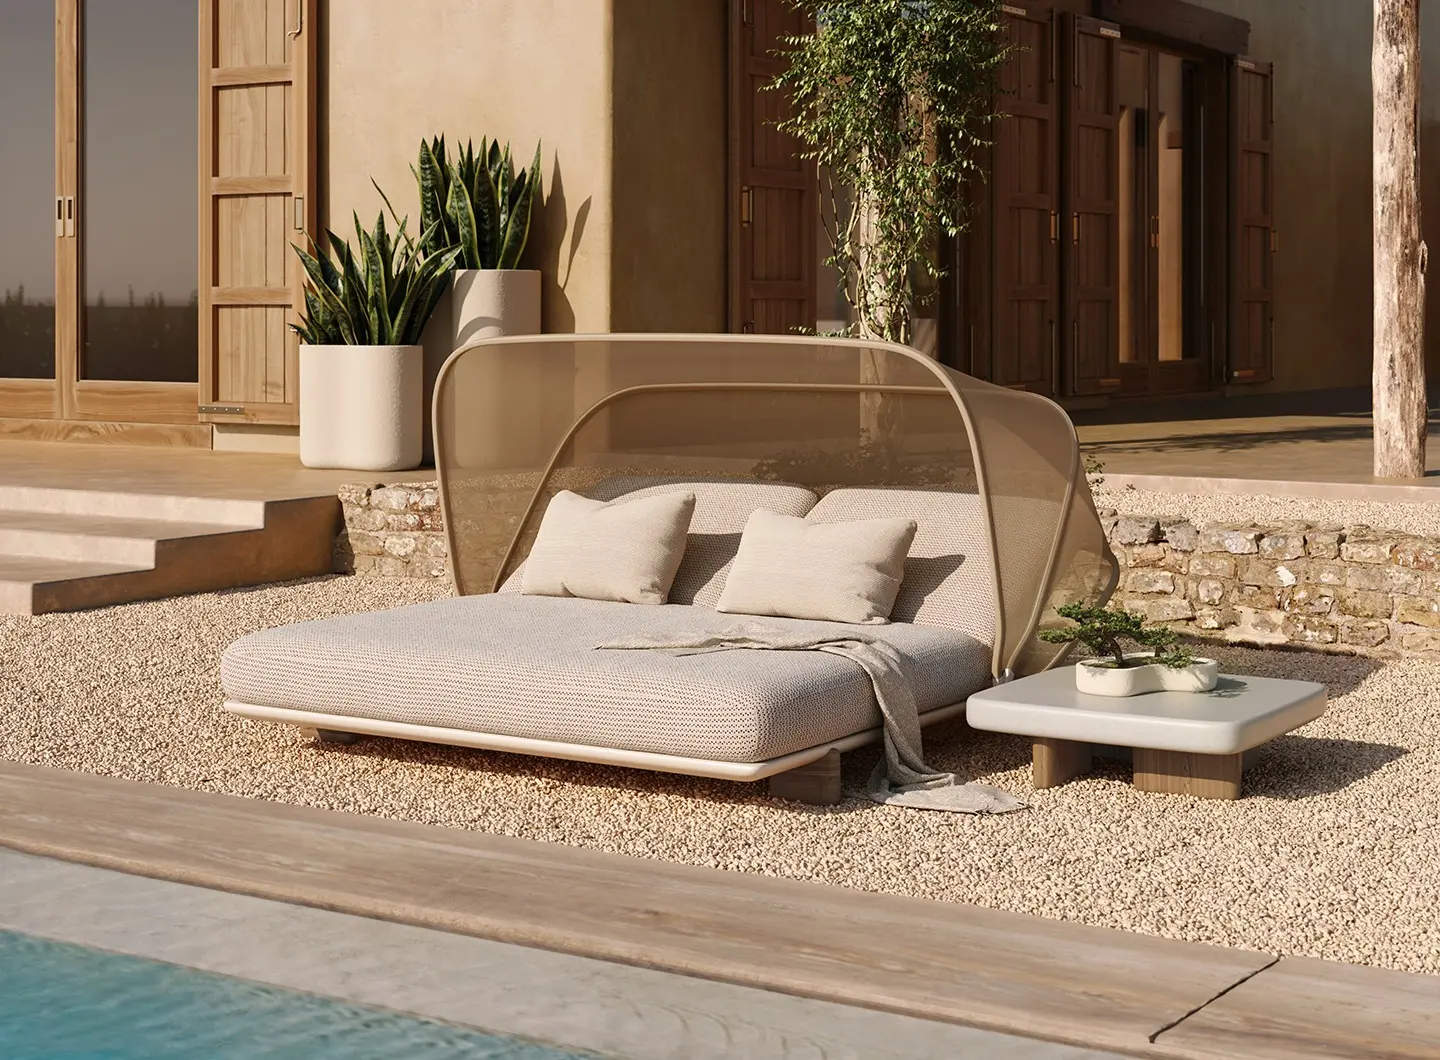 Milos daybed